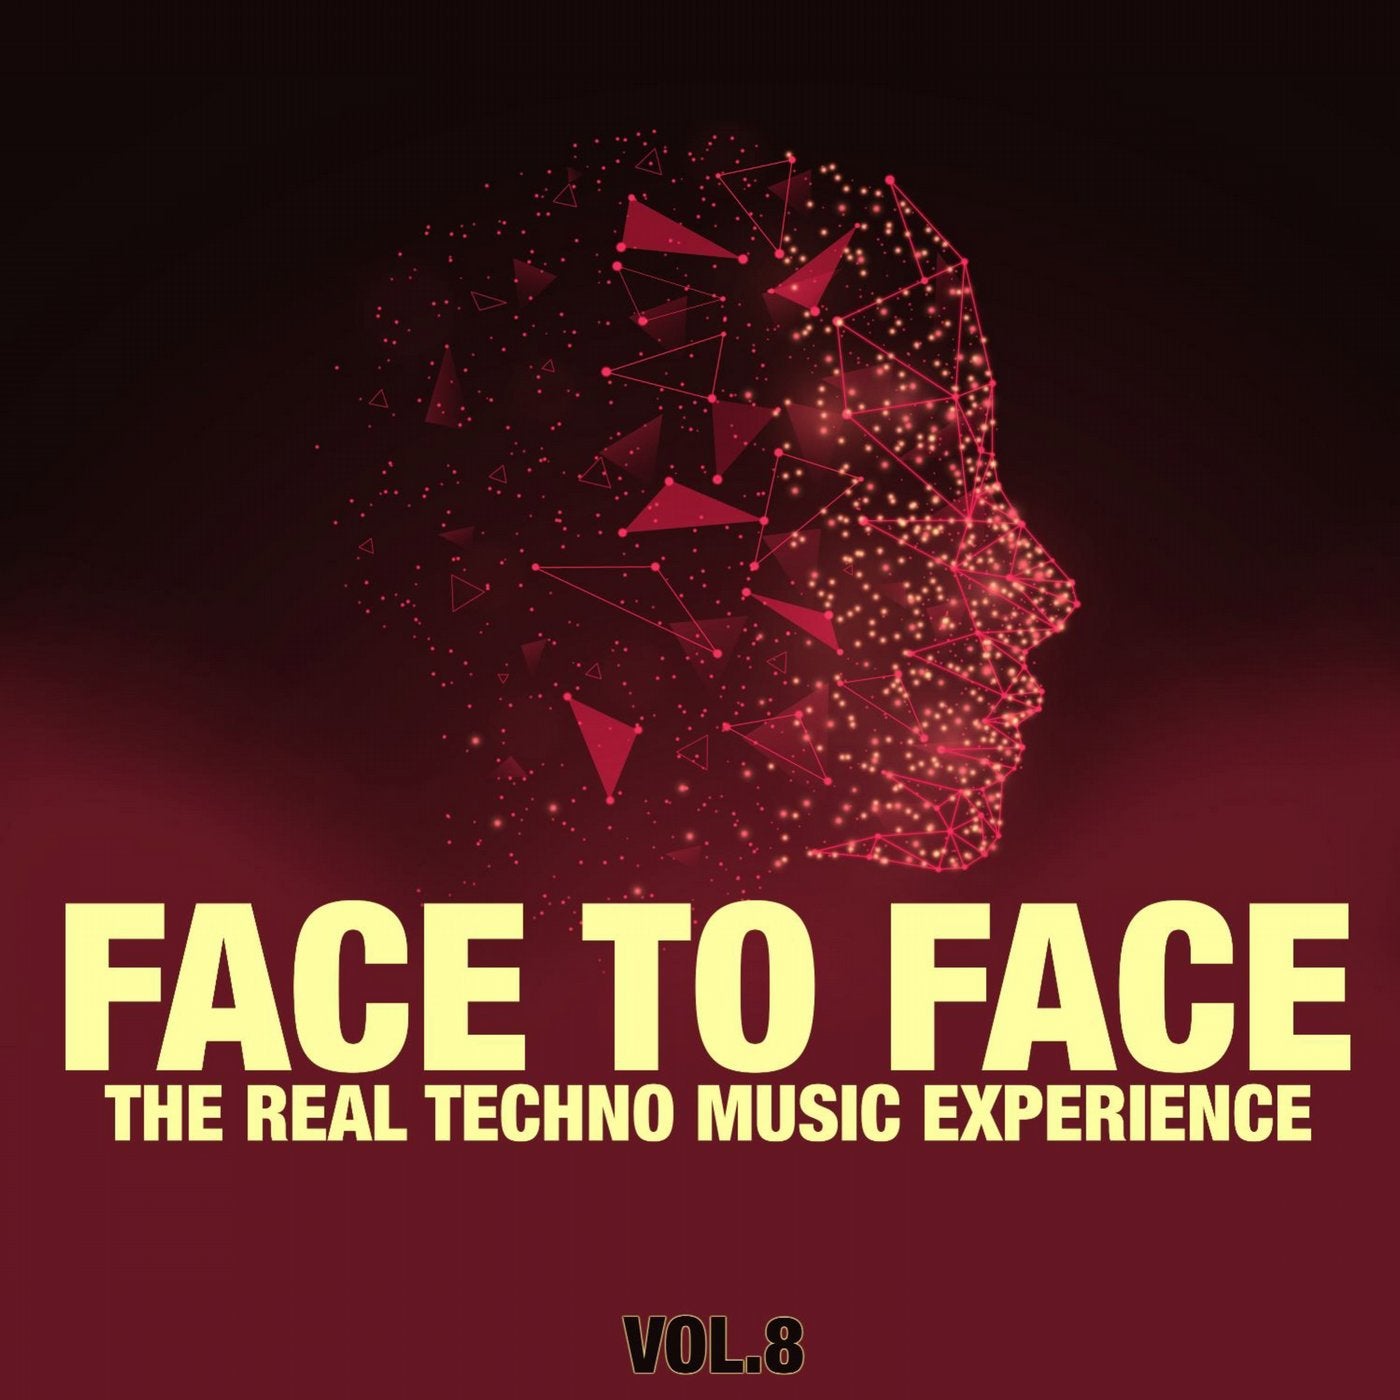 Face to Face, Vol. 8 (The Real Techno Music Experience)